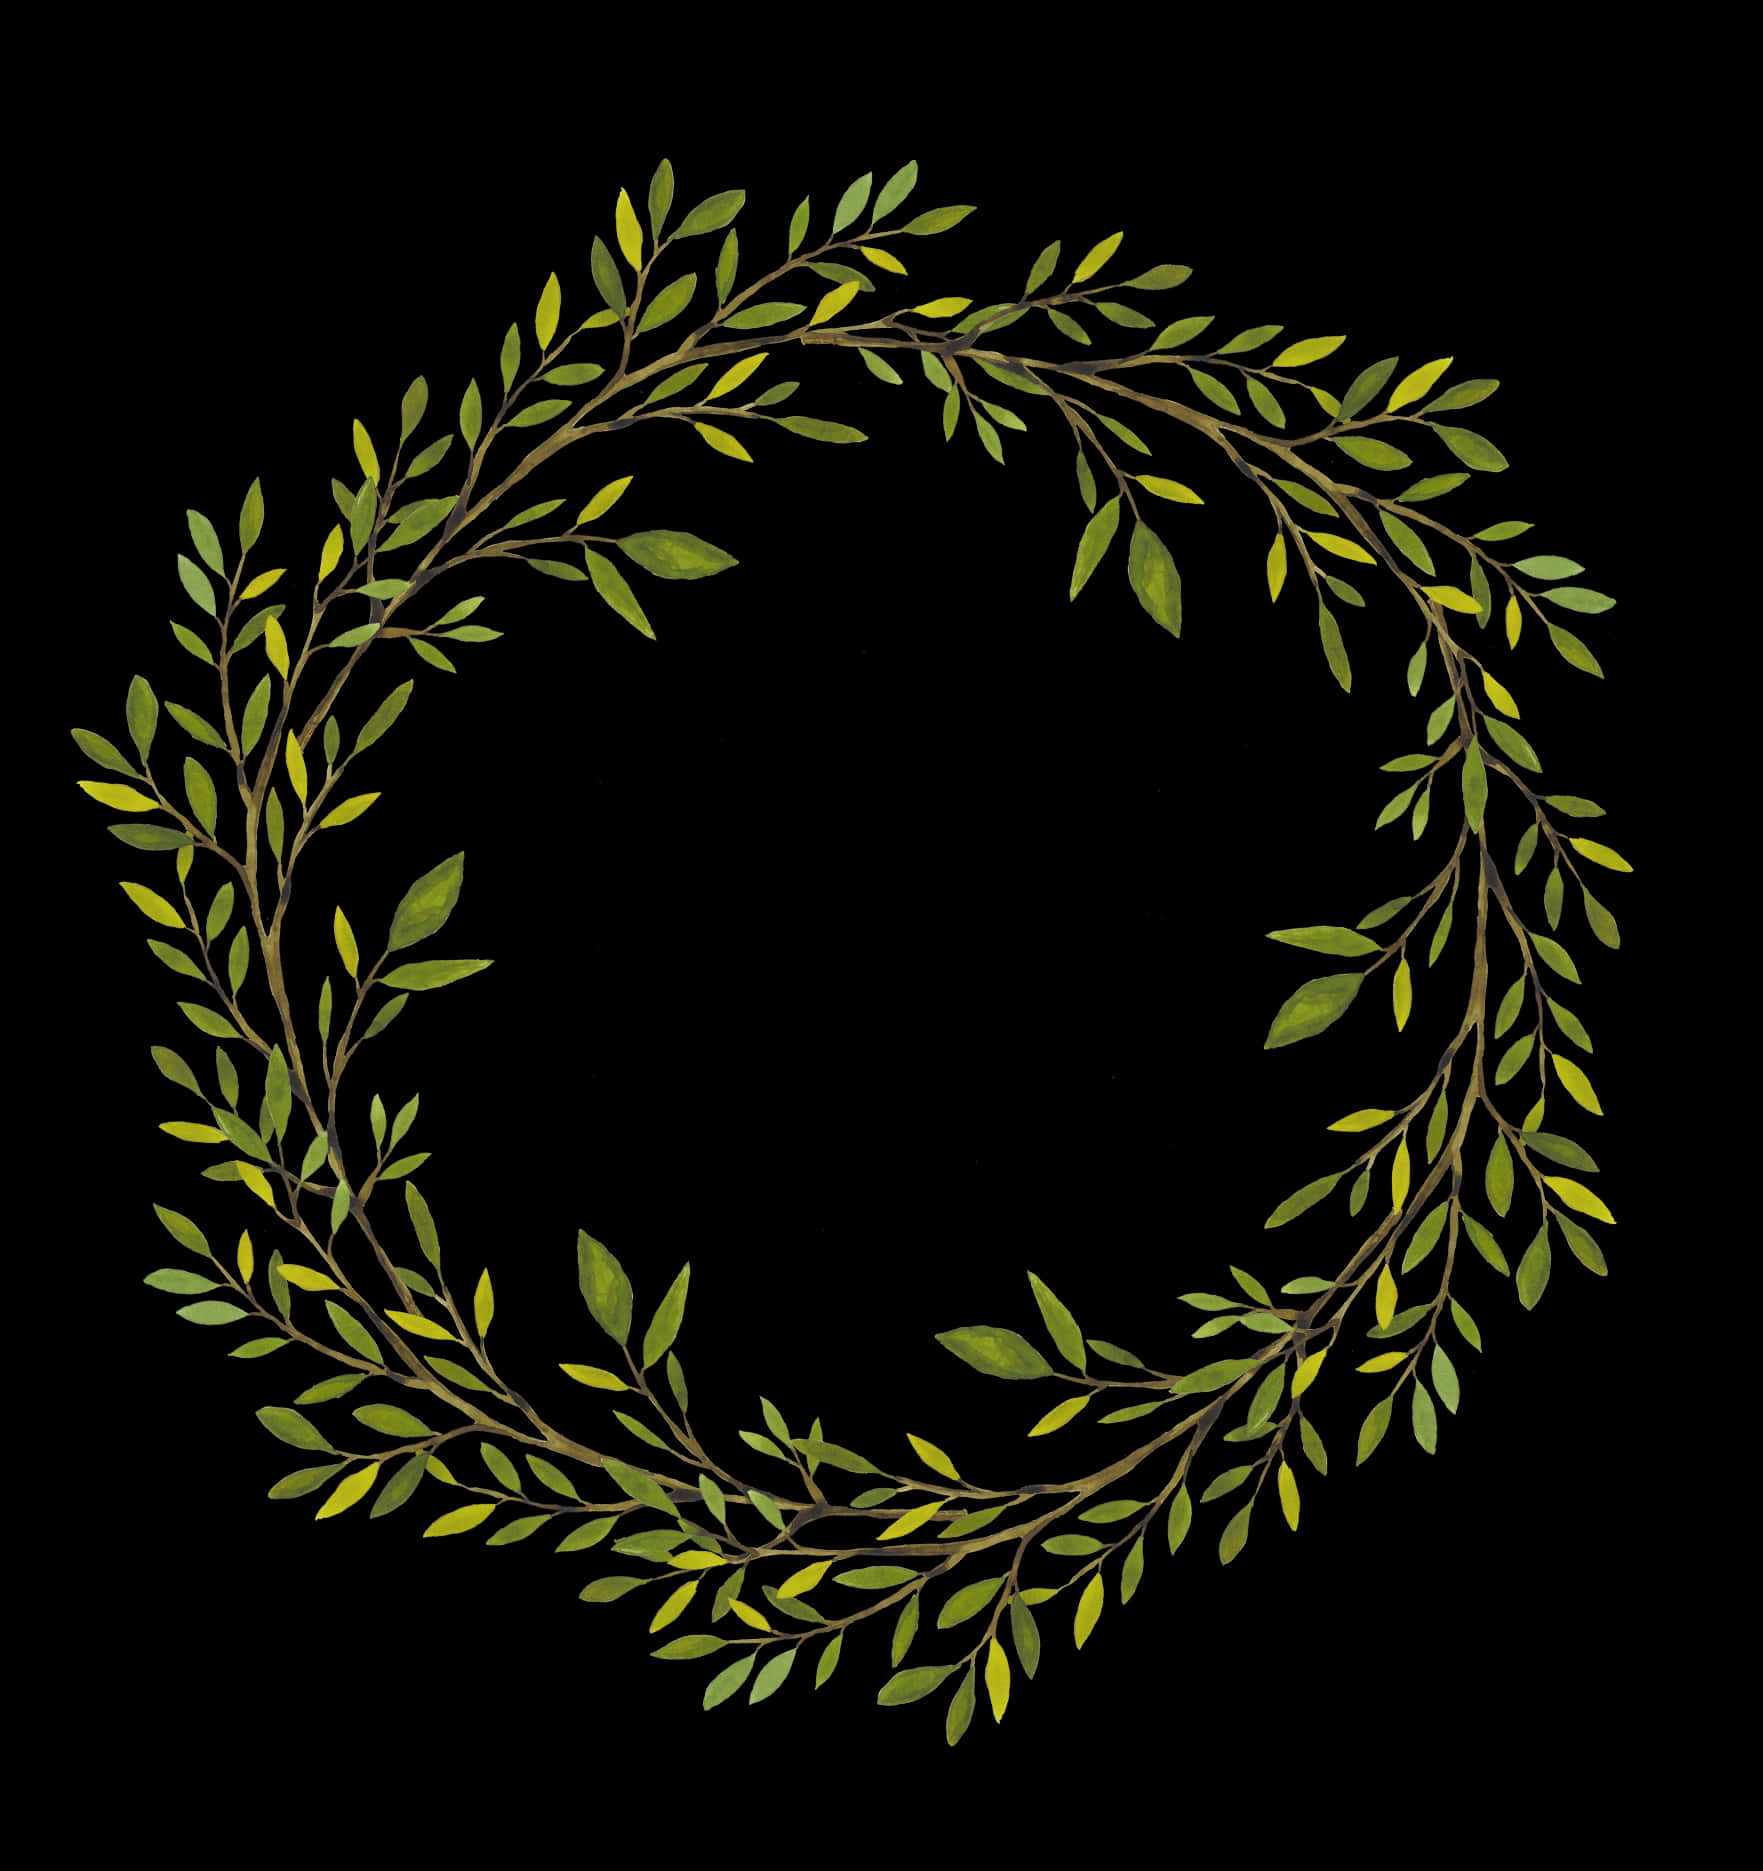 A Wreath Of Leaves On A Black Background